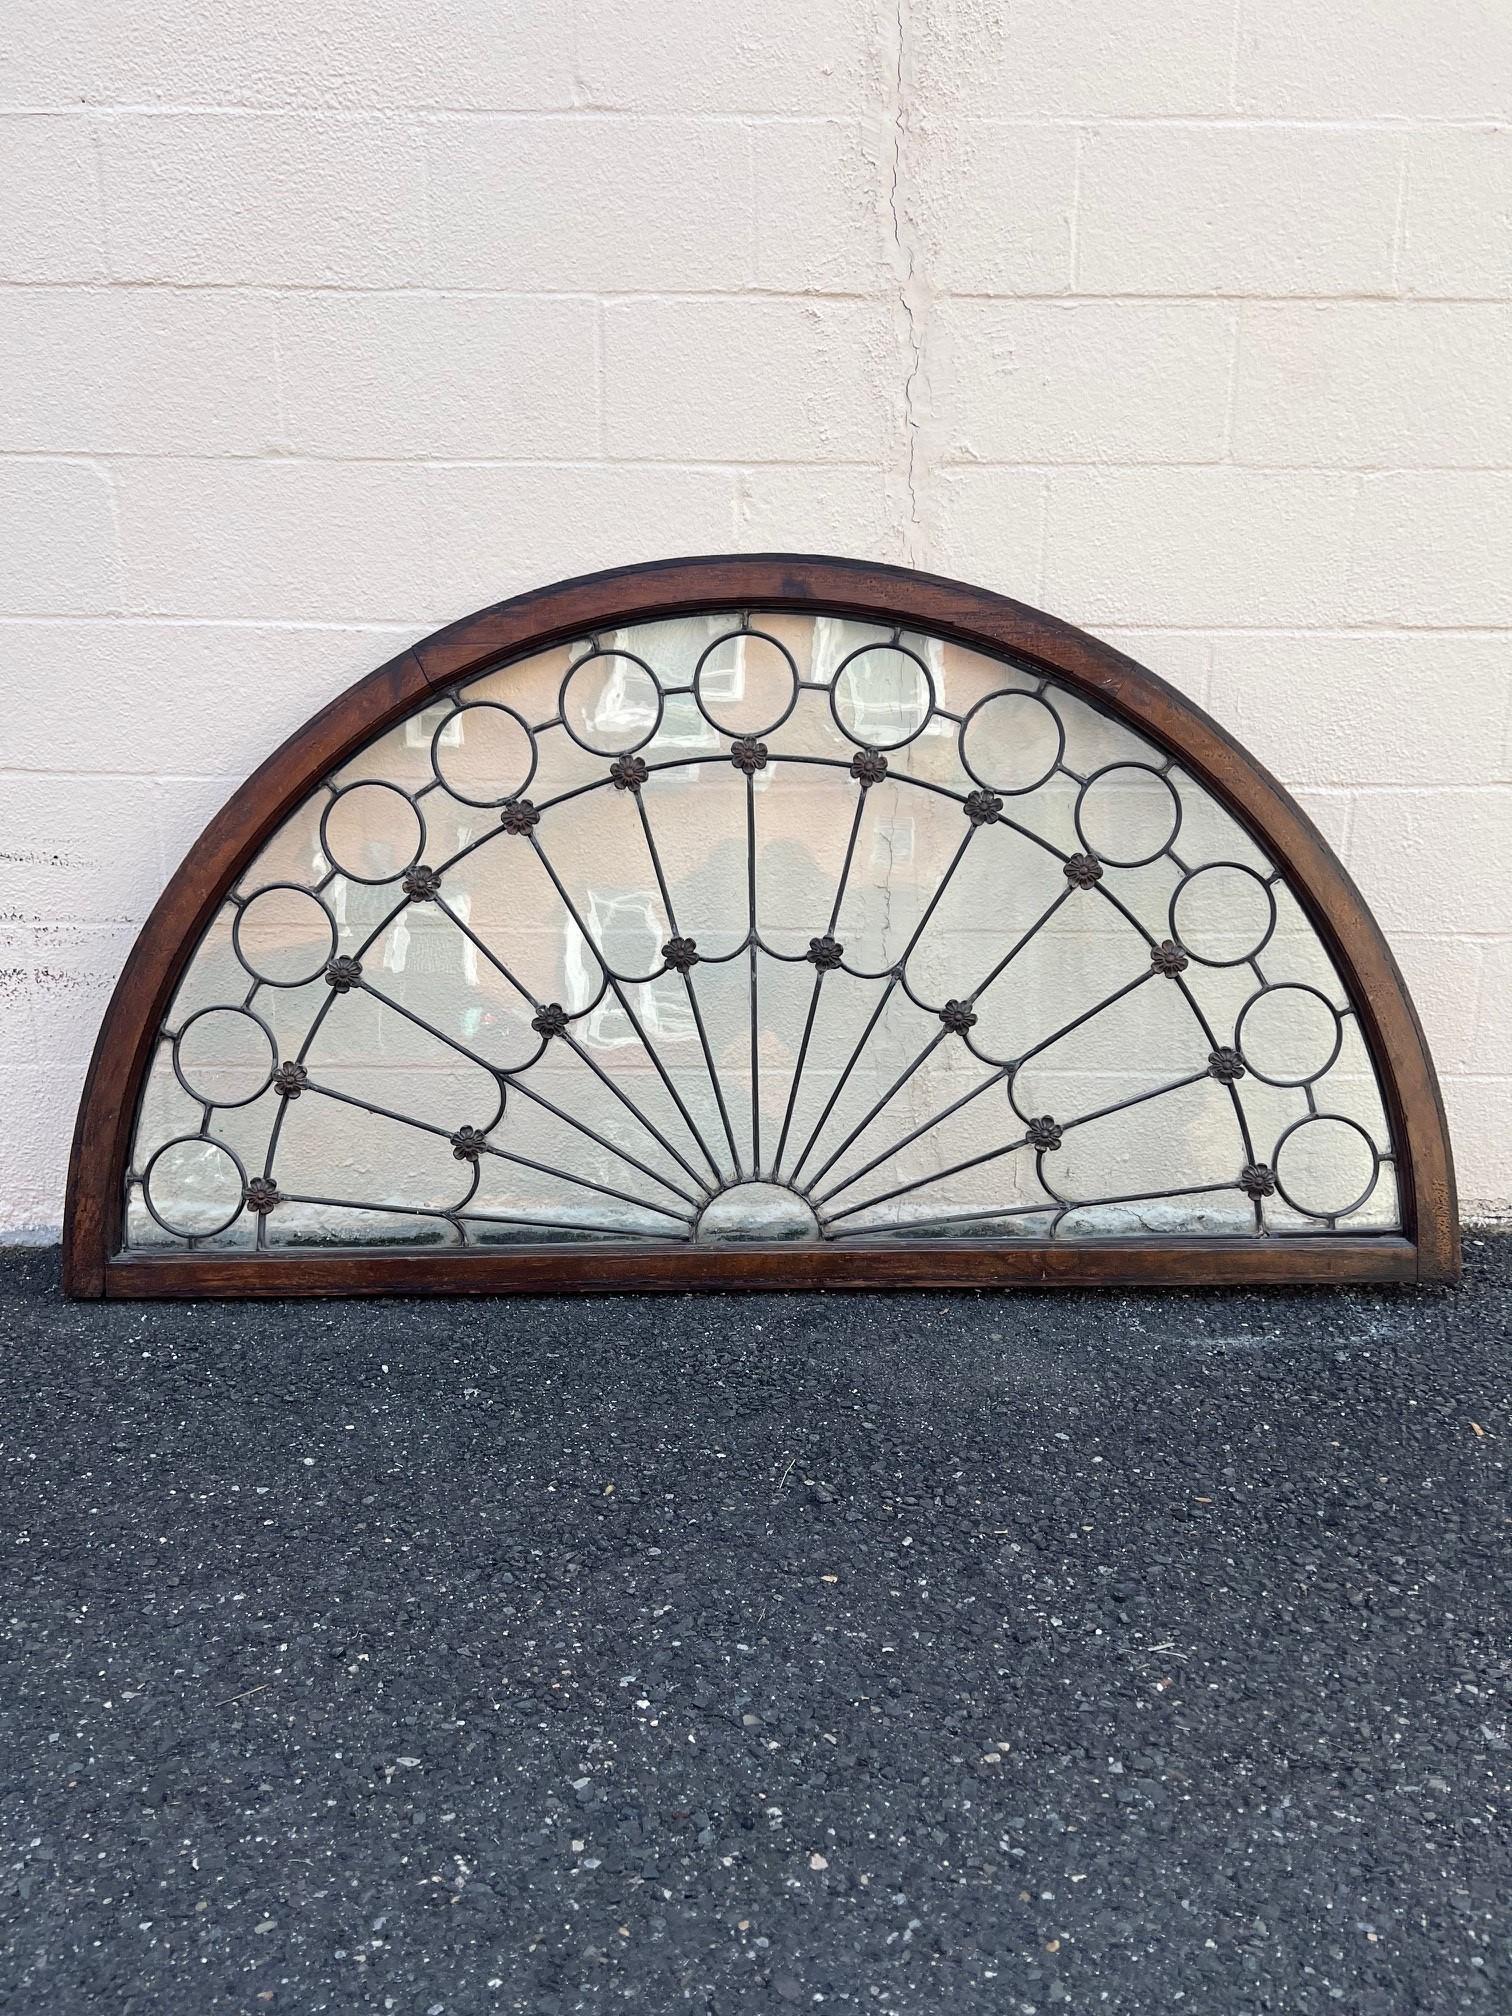 Gorgeous antique arched transom window clear glass with zinc caning early 1800s. This is a really nice window in great condition no breaks in the glass and a sturdy frame. Using Zinc caning instead of lead makes the window much stronger and the lead